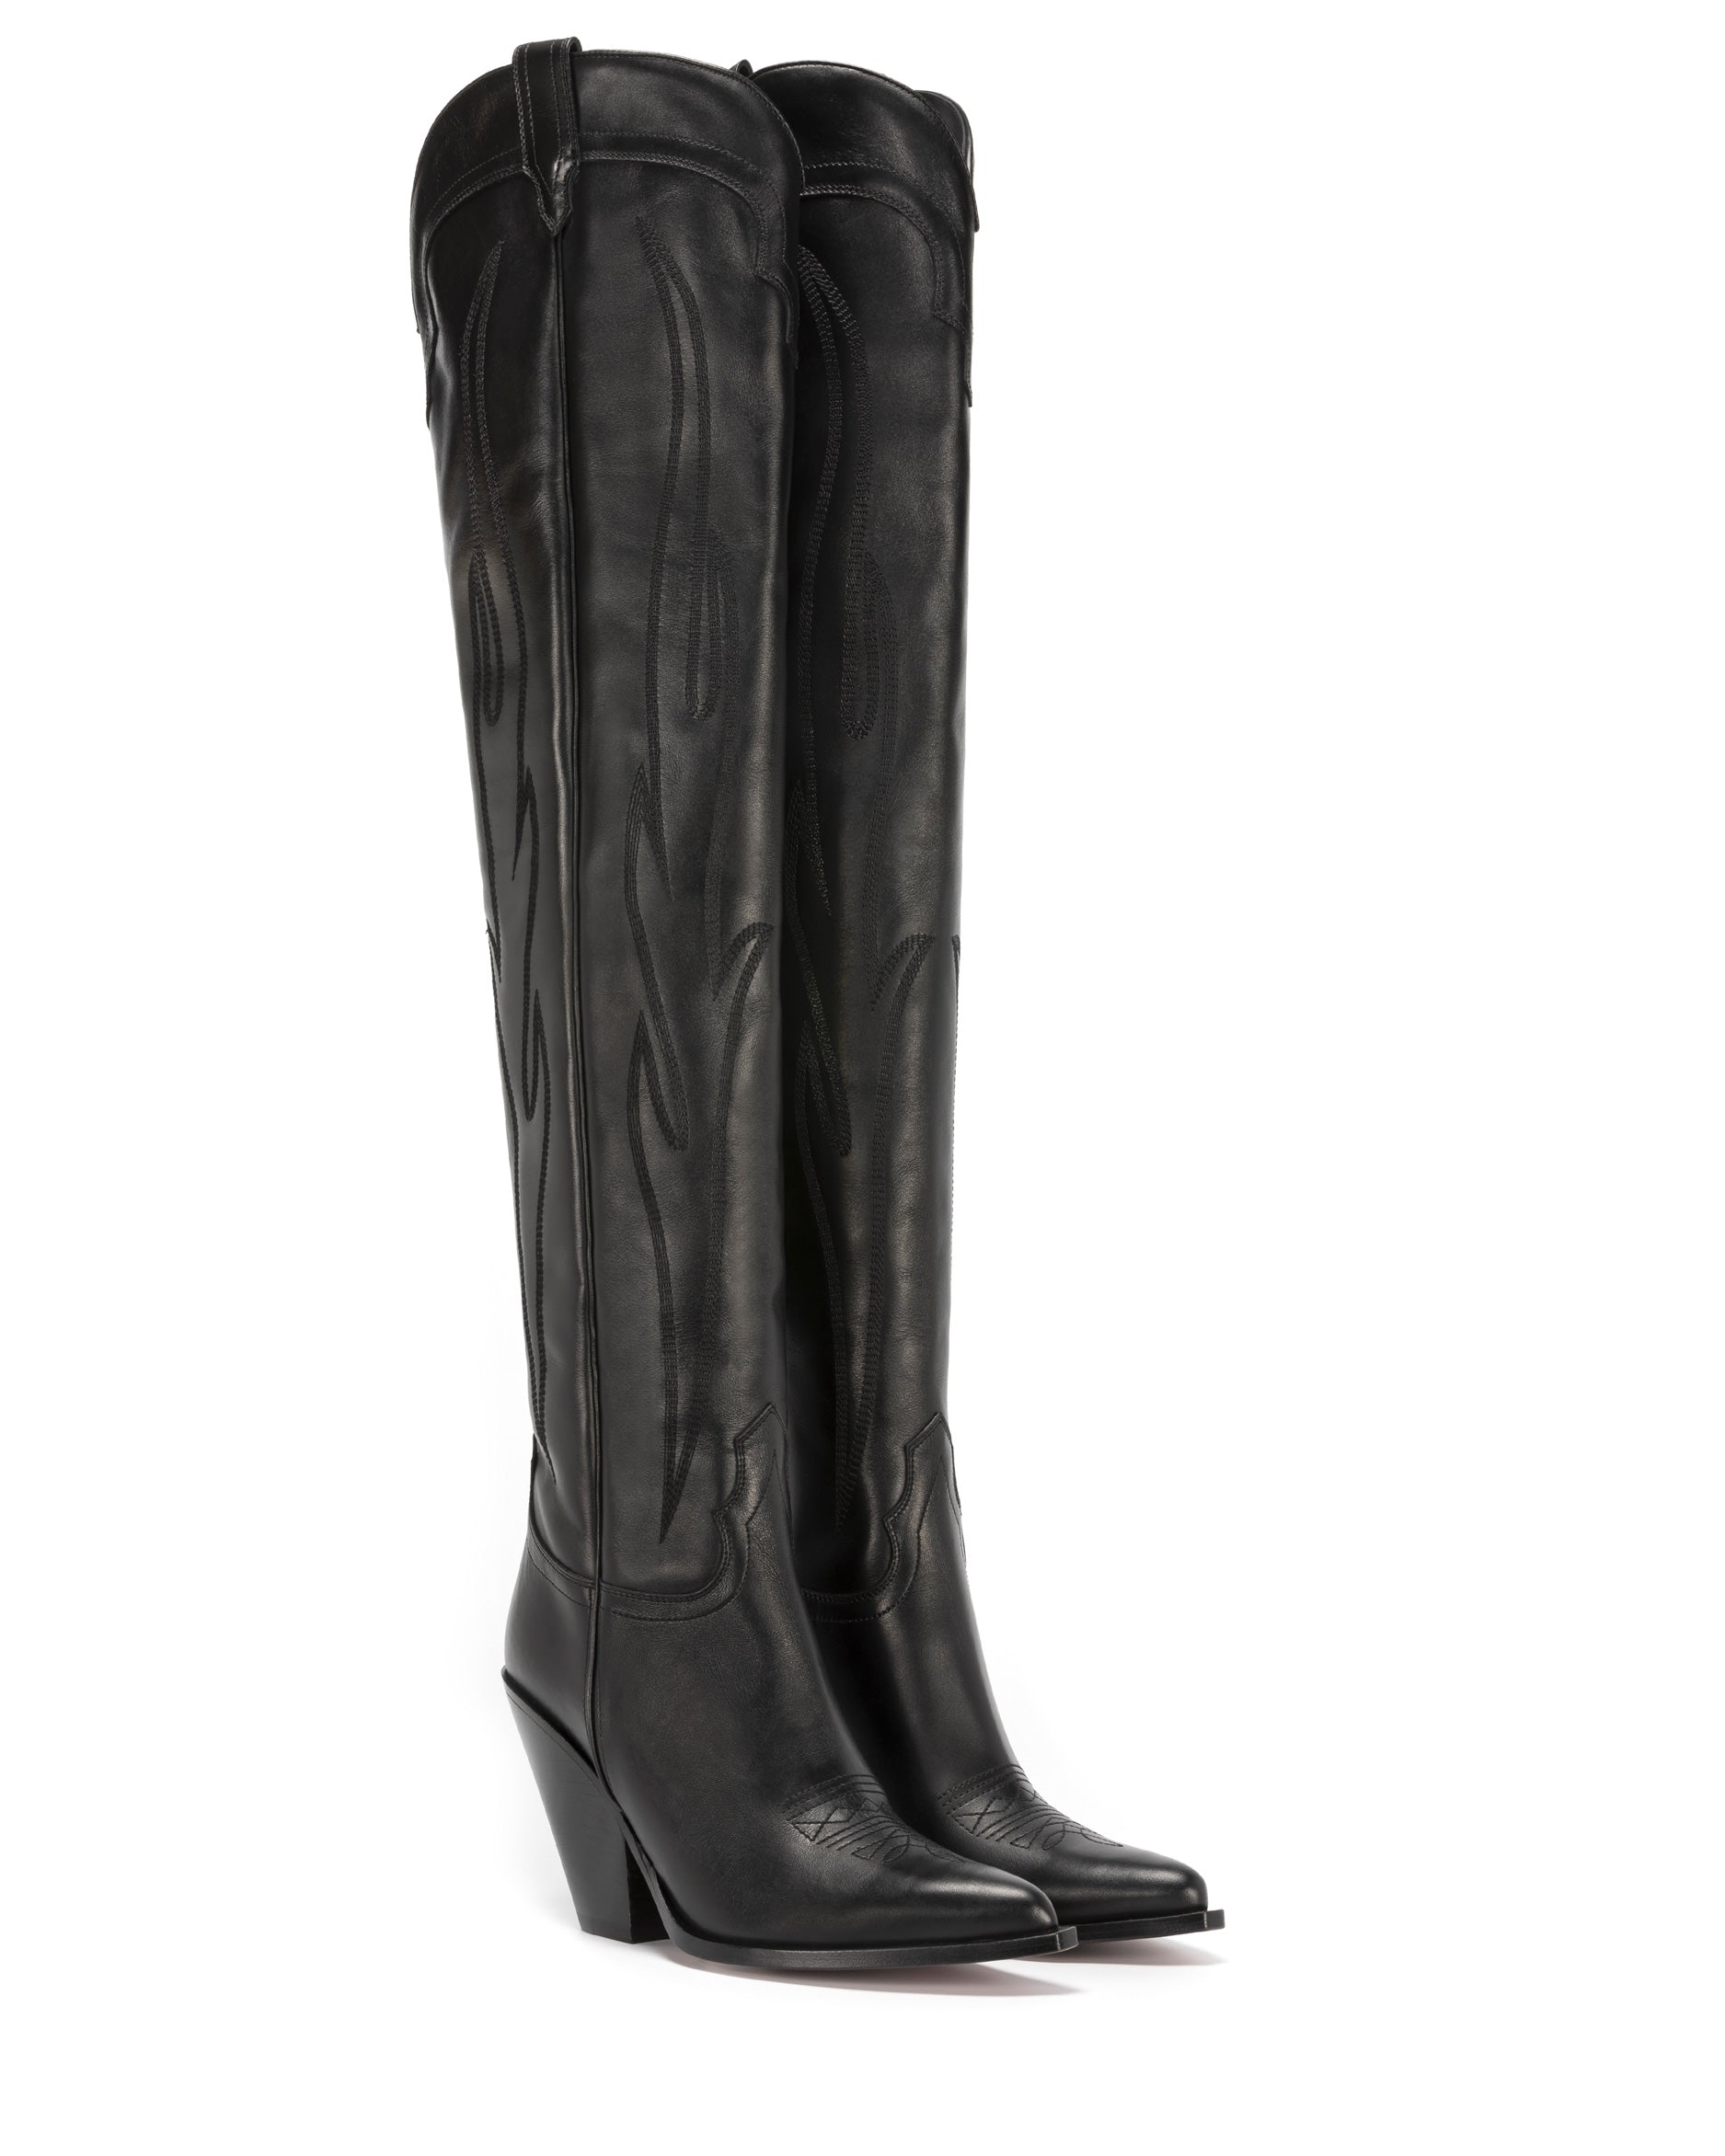 HERMOSA-90-Women_s-Over-The-Knee-Boots-in-Black-Calfskin--On-Tone-Embroidery_02_Front